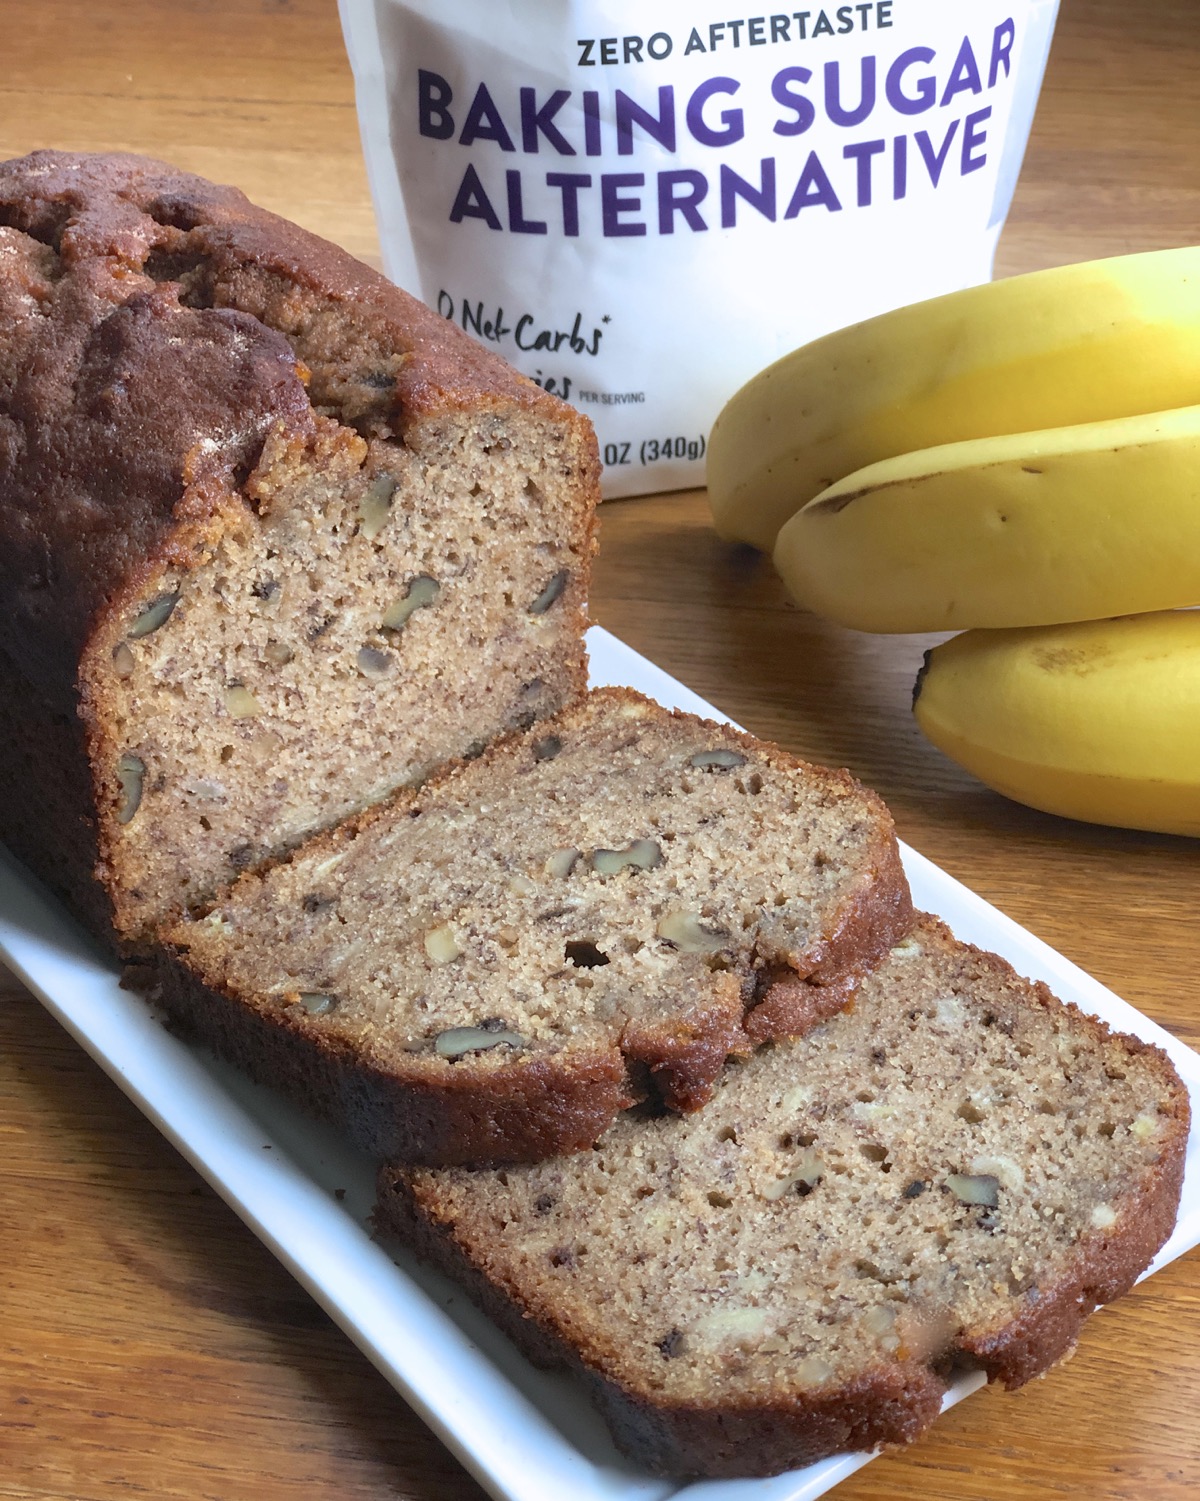 Loaf of banana bread on a plate, sliced, bananas and bag of Baking Sugar Alternative in the background.